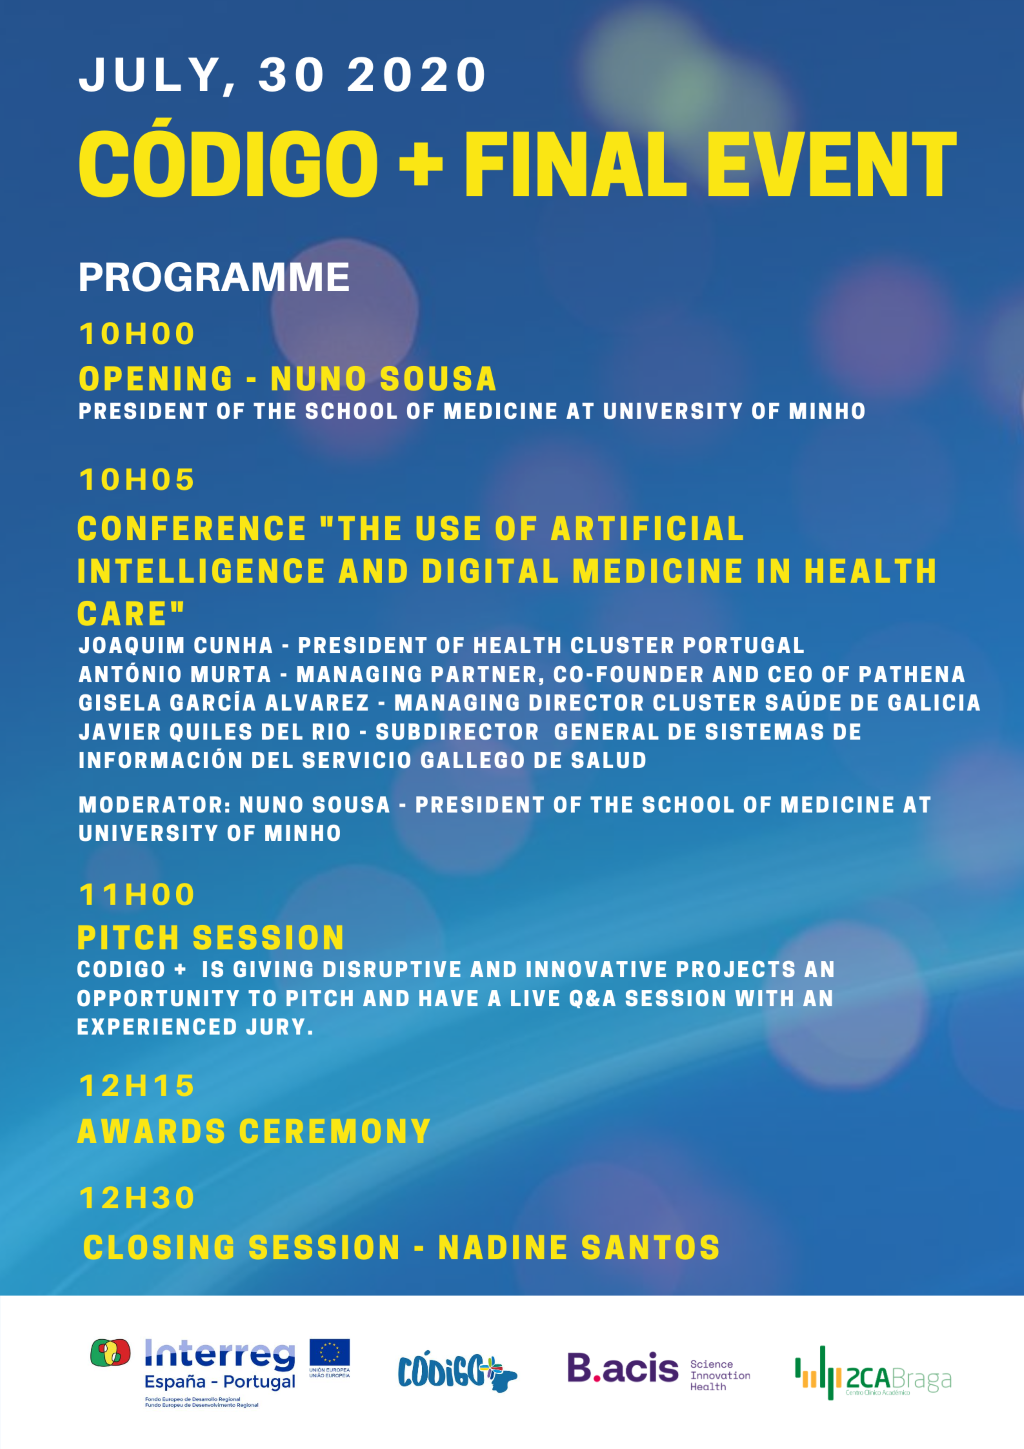 Conference “The Use of Artificial Intelligent and Digital Medicine in Health Care”